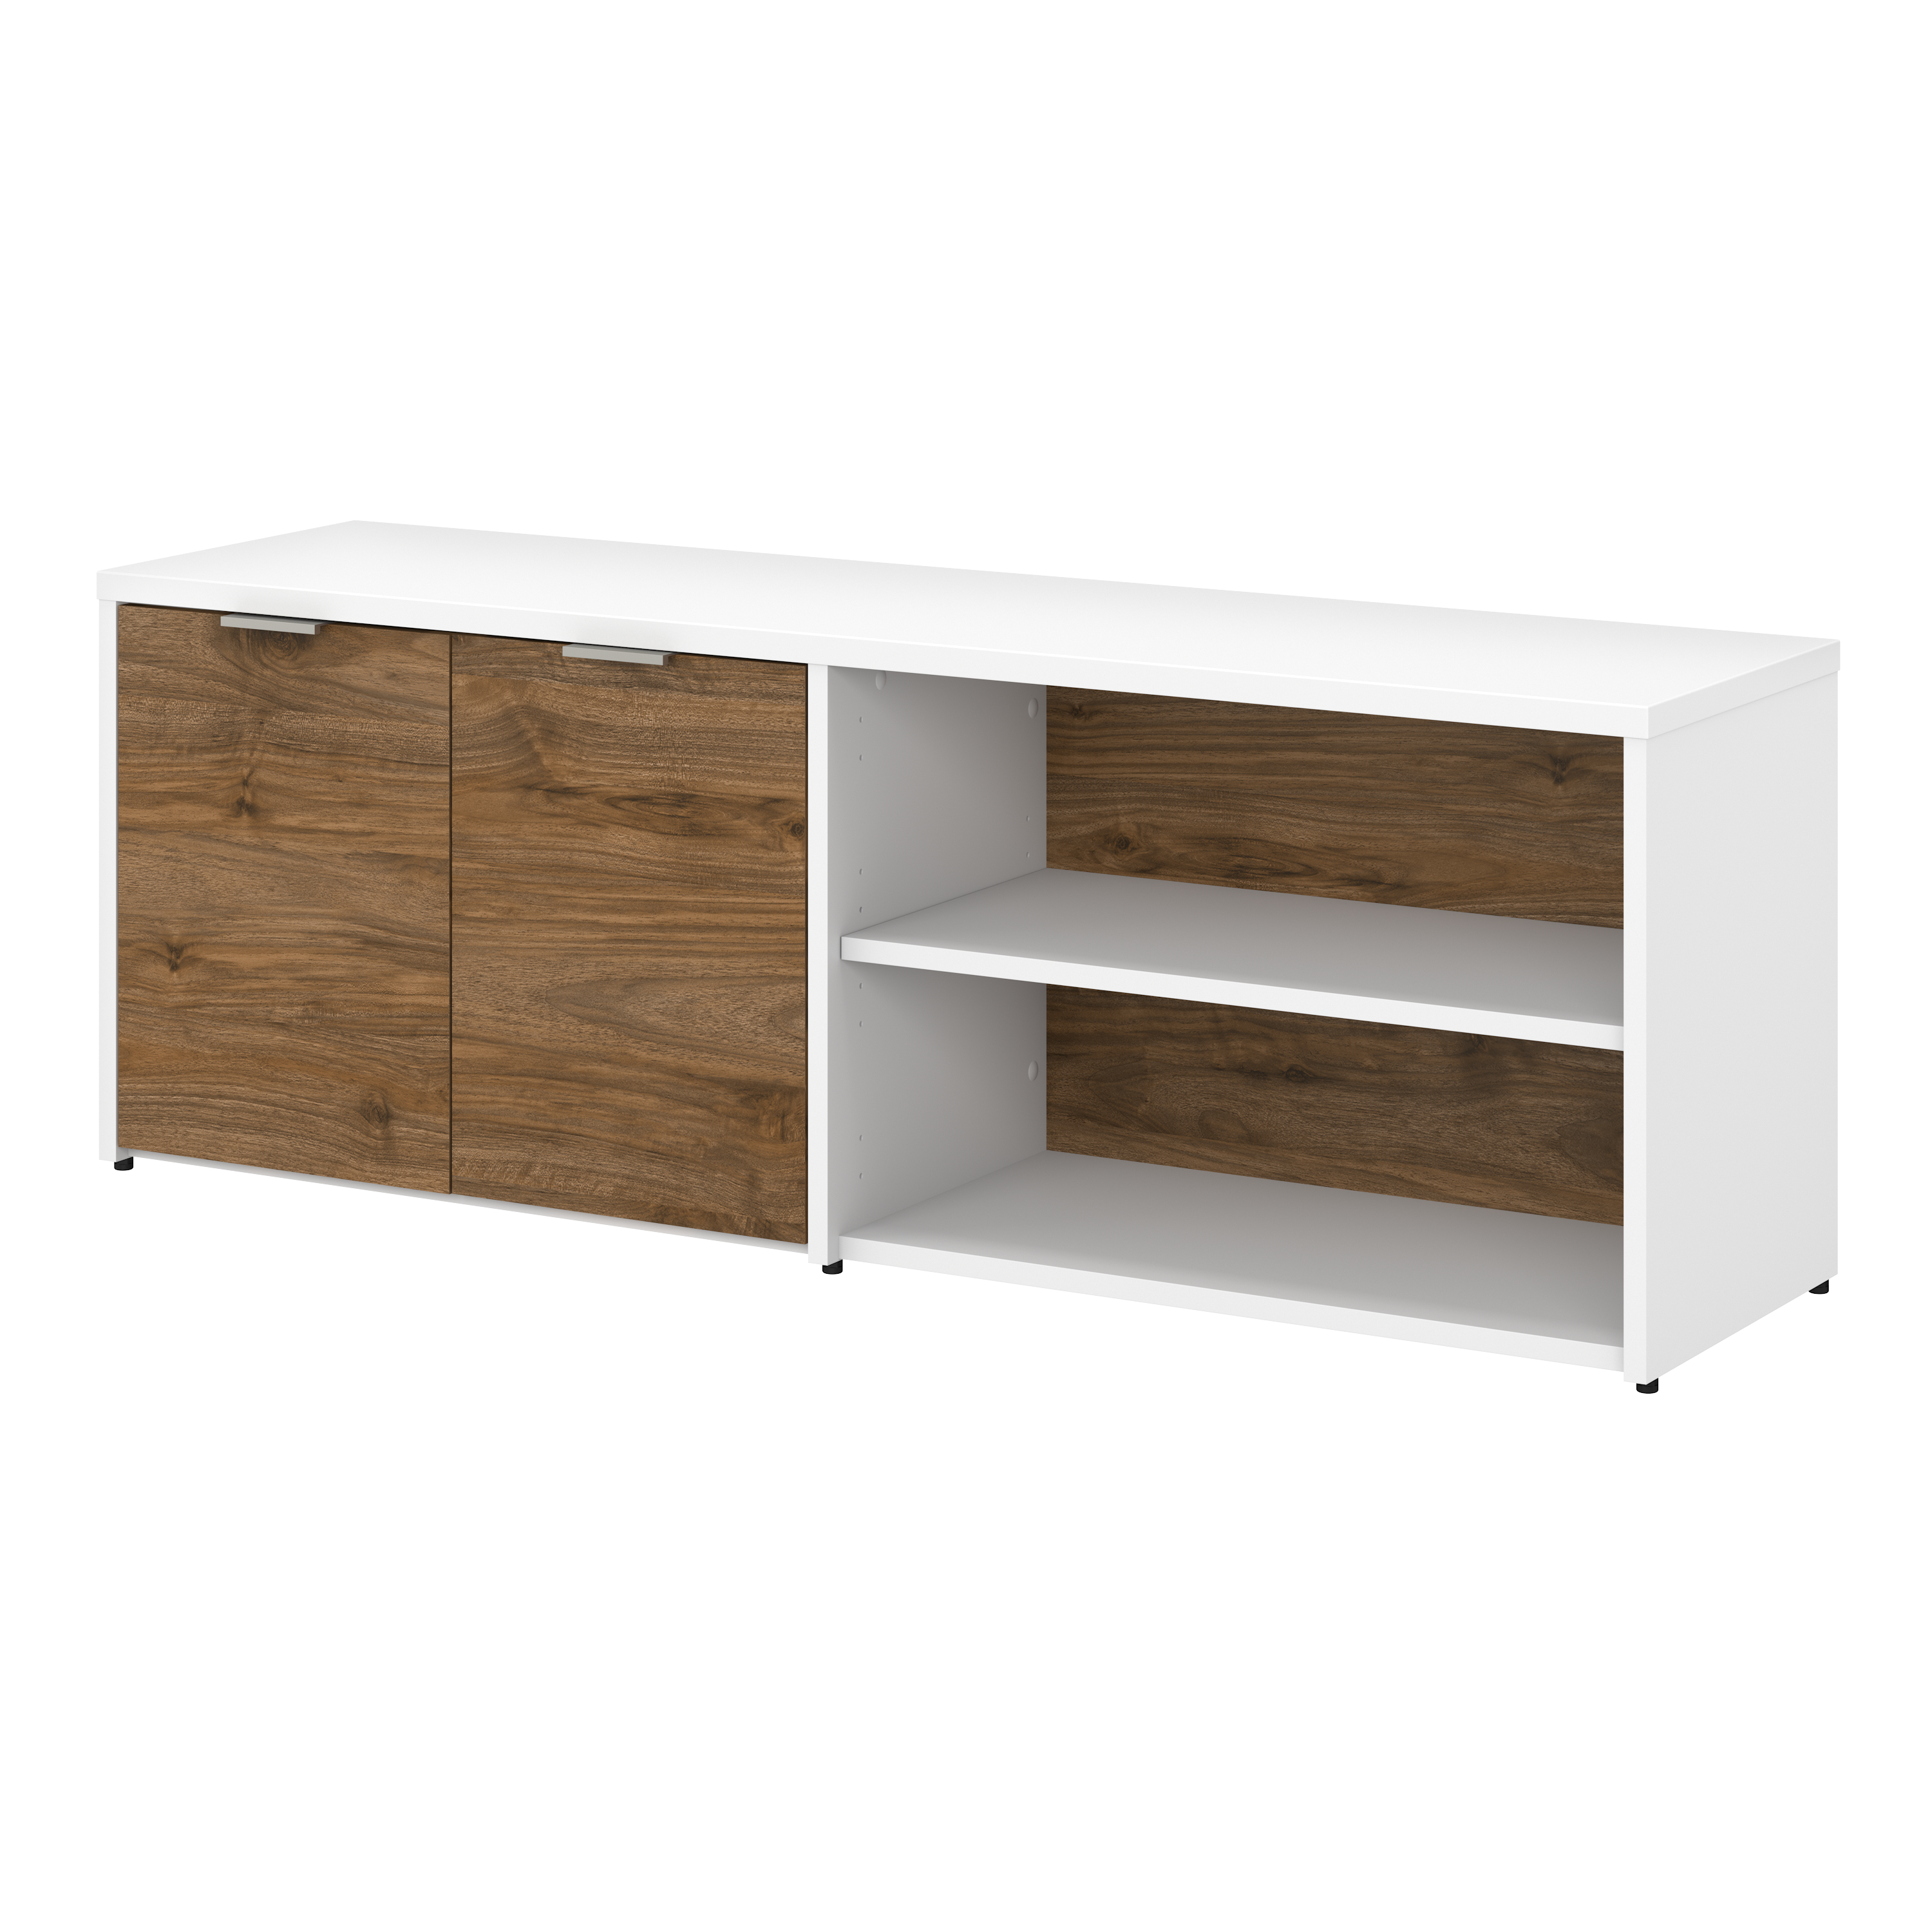 Shop Bush Business Furniture Jamestown Low Storage Cabinet with Doors and Shelves 02 JTS160FWWH #color_fresh walnut/white